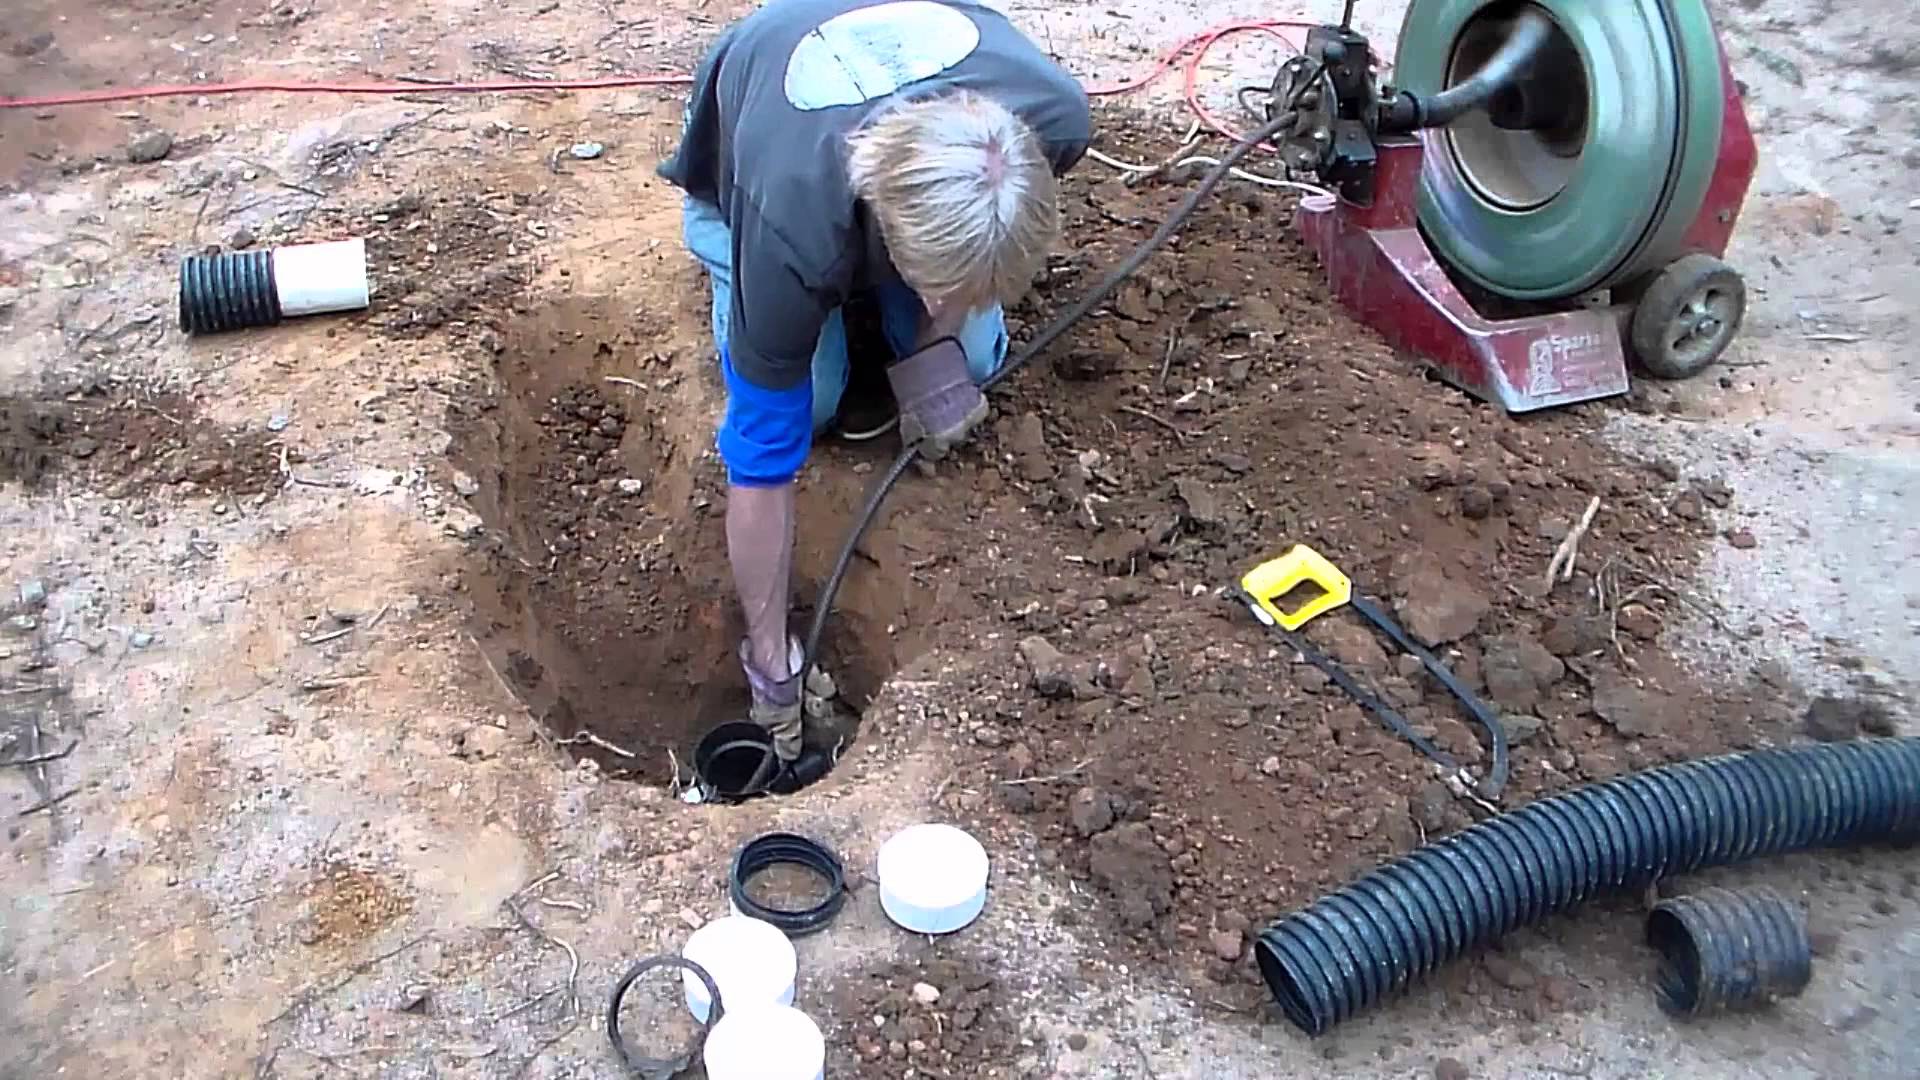 How To Find And Repair Broken French Drain Pipe - DIY - YouTube